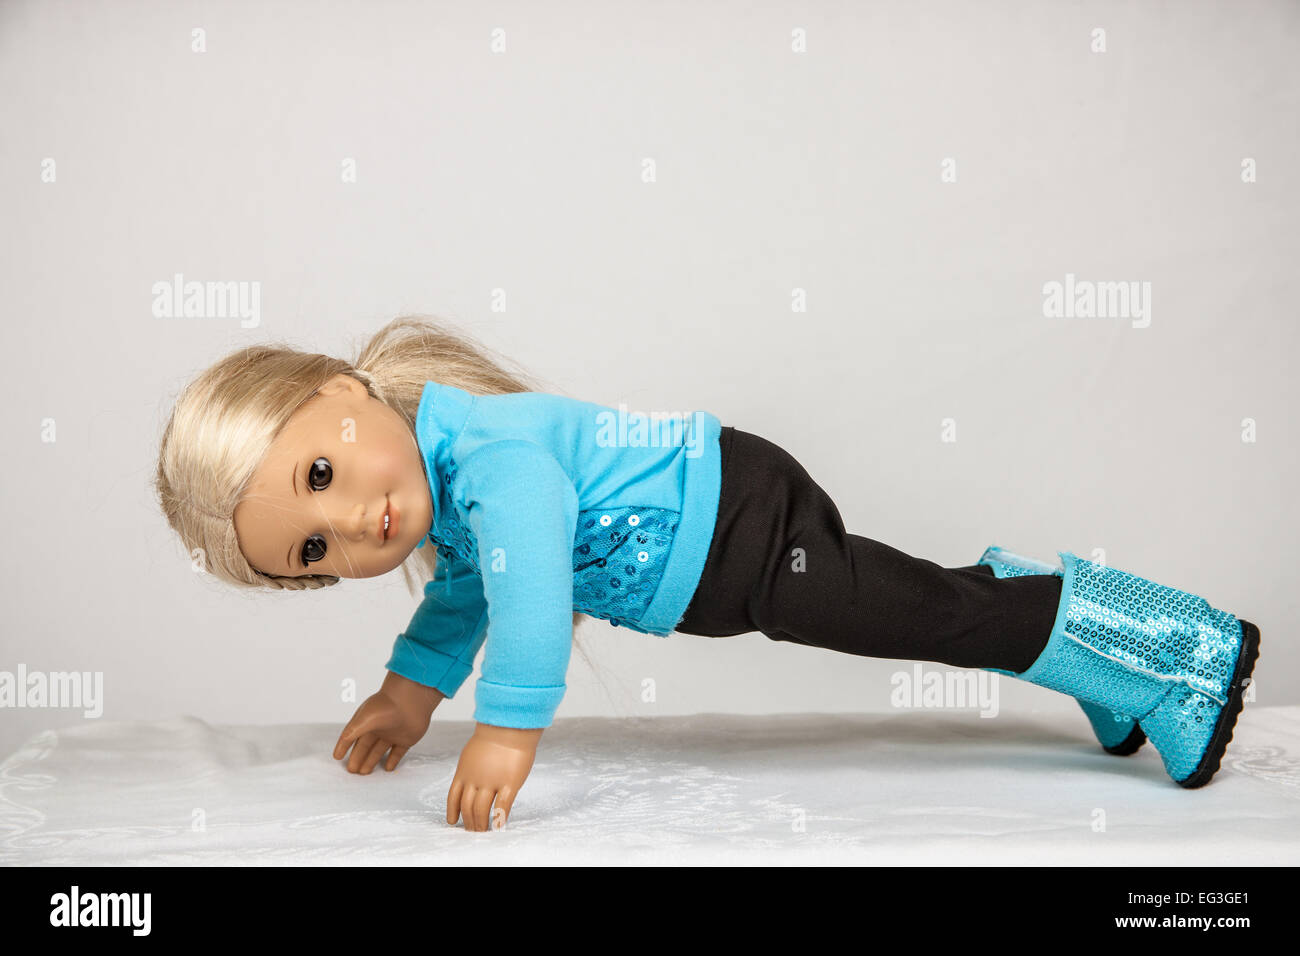 American Girl doll in her workout clothes doing push-ups Stock Photo